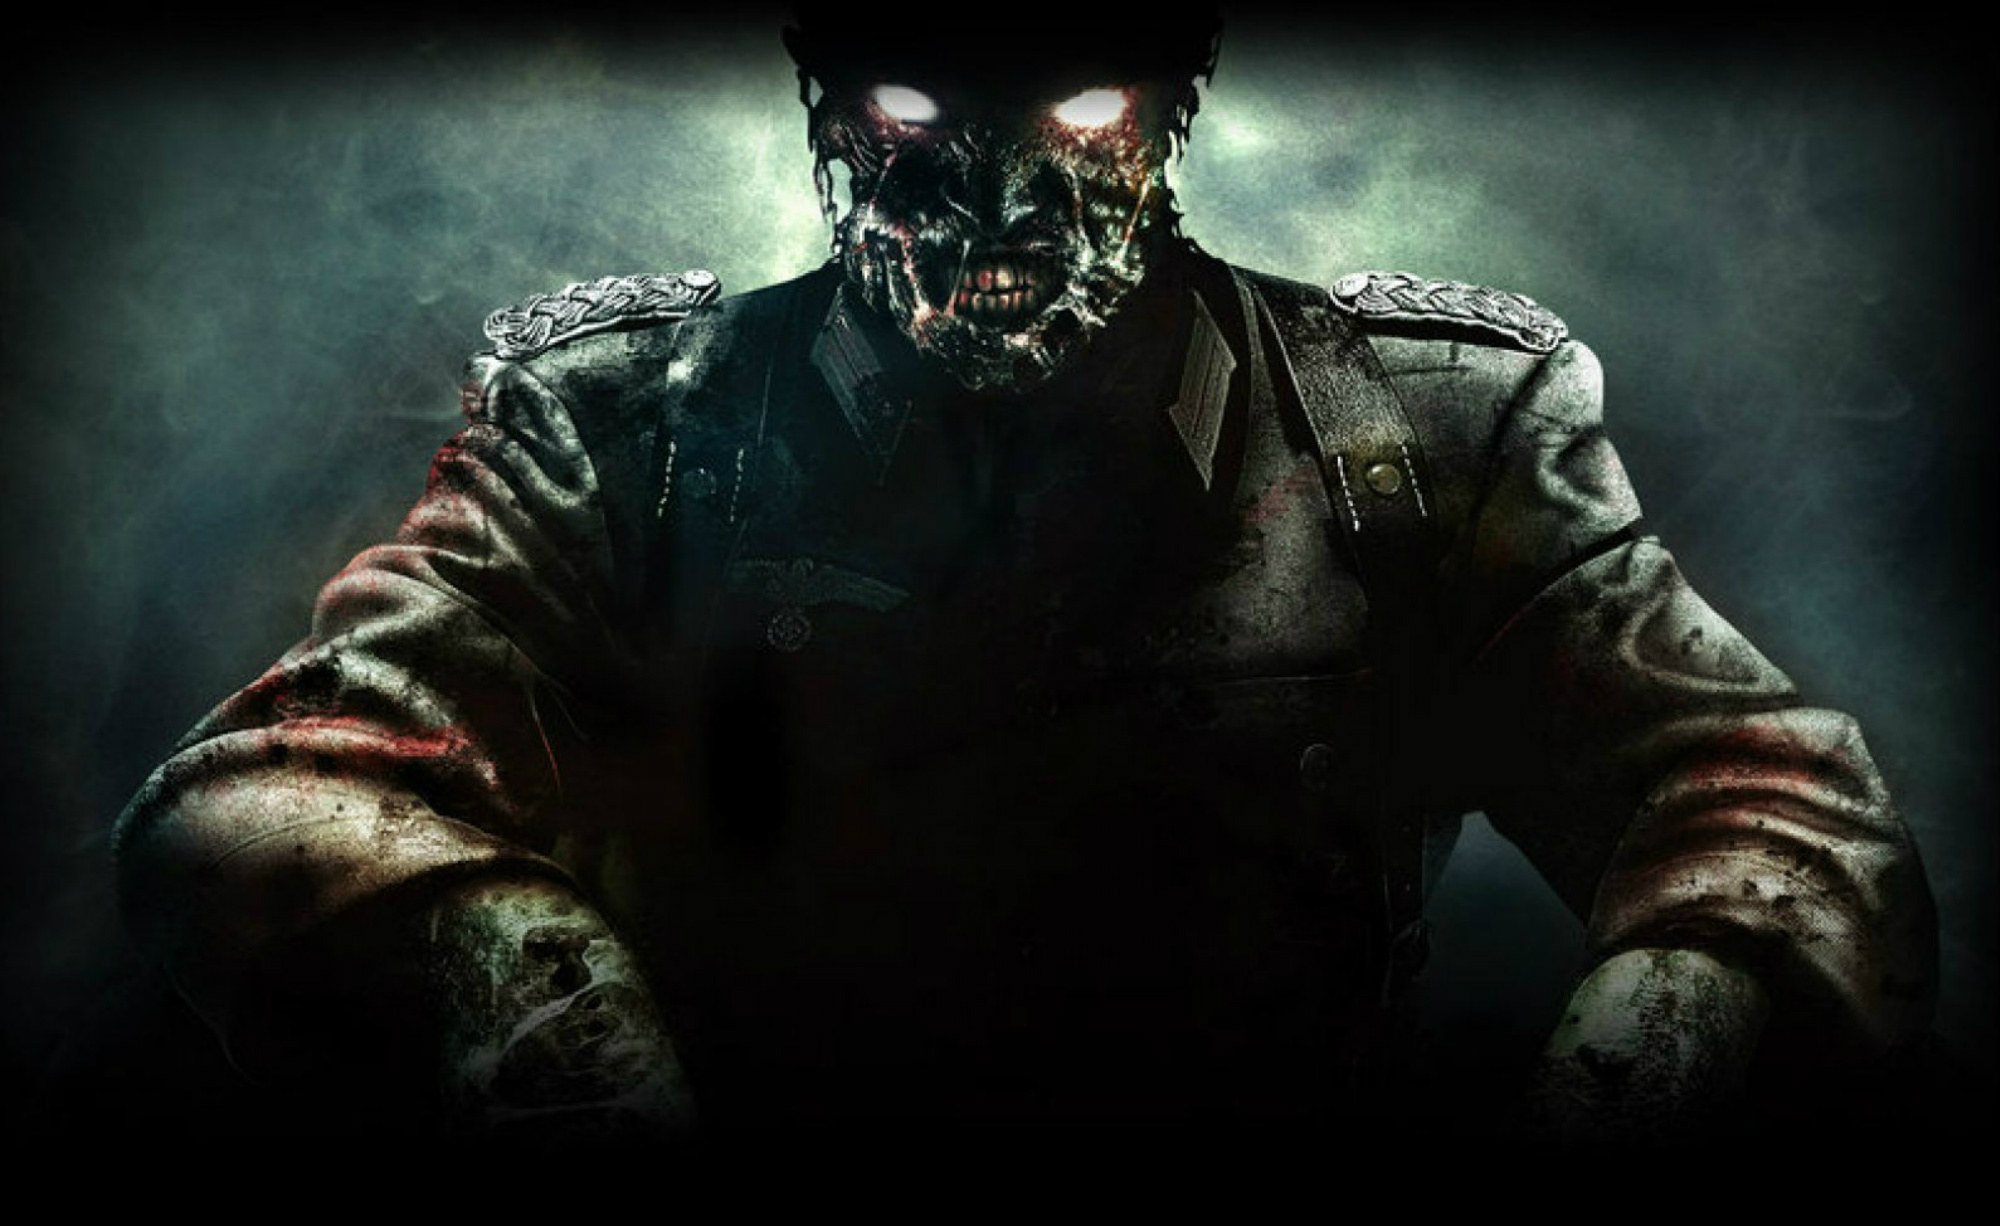 Image - Wiki-background | Call of Duty Zombies Wiki | FANDOM powered by